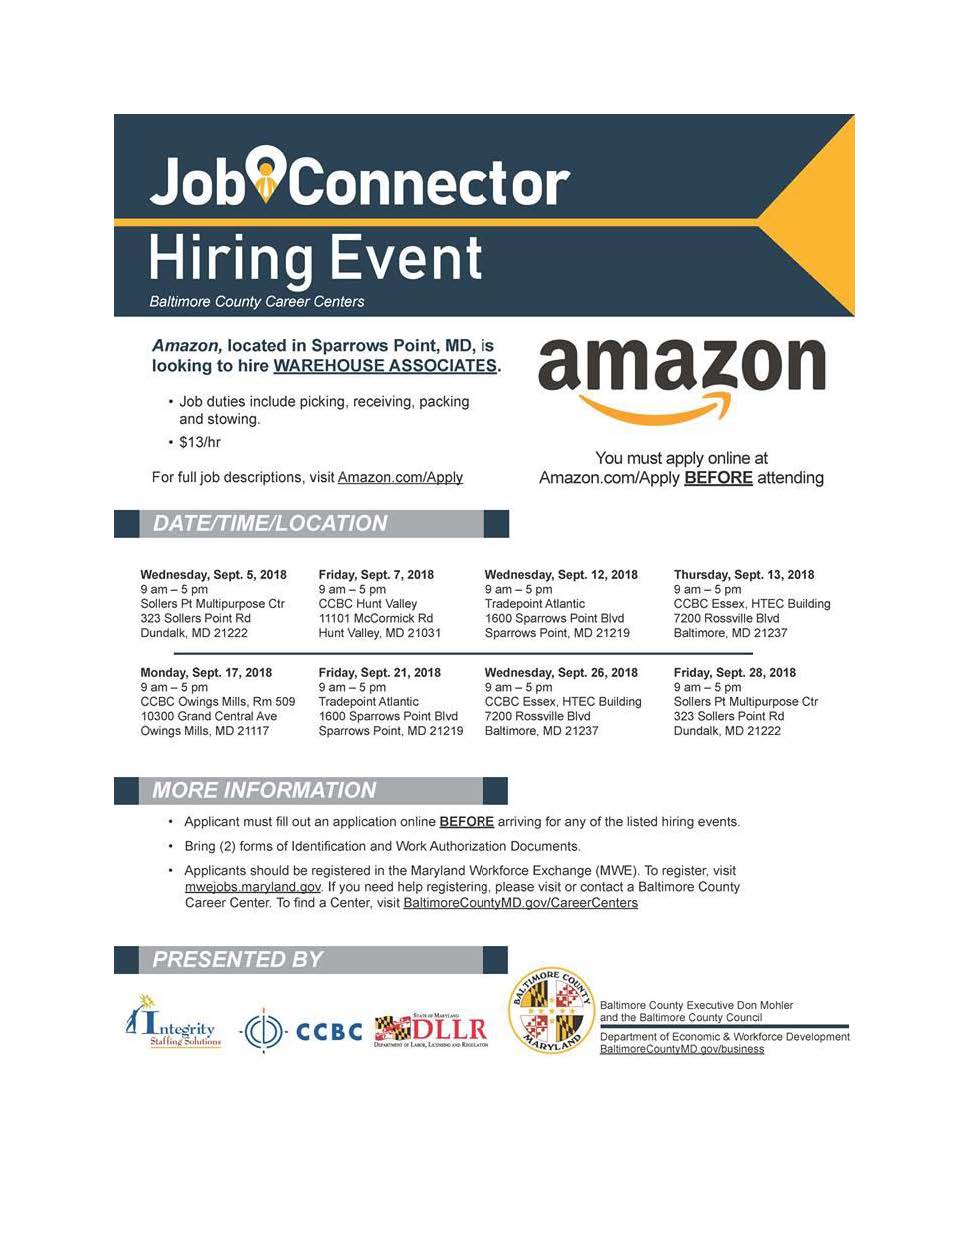 Berc Amazon Is Hiring Warehouse Positions Apply Online At T Co Ca6u4cfah2 Before Attending Hiring Event 13 Hr See Job Description At T Co Ca6u4cfah2 Amazon Amazon Jobs T Co Wi3ifrihgt